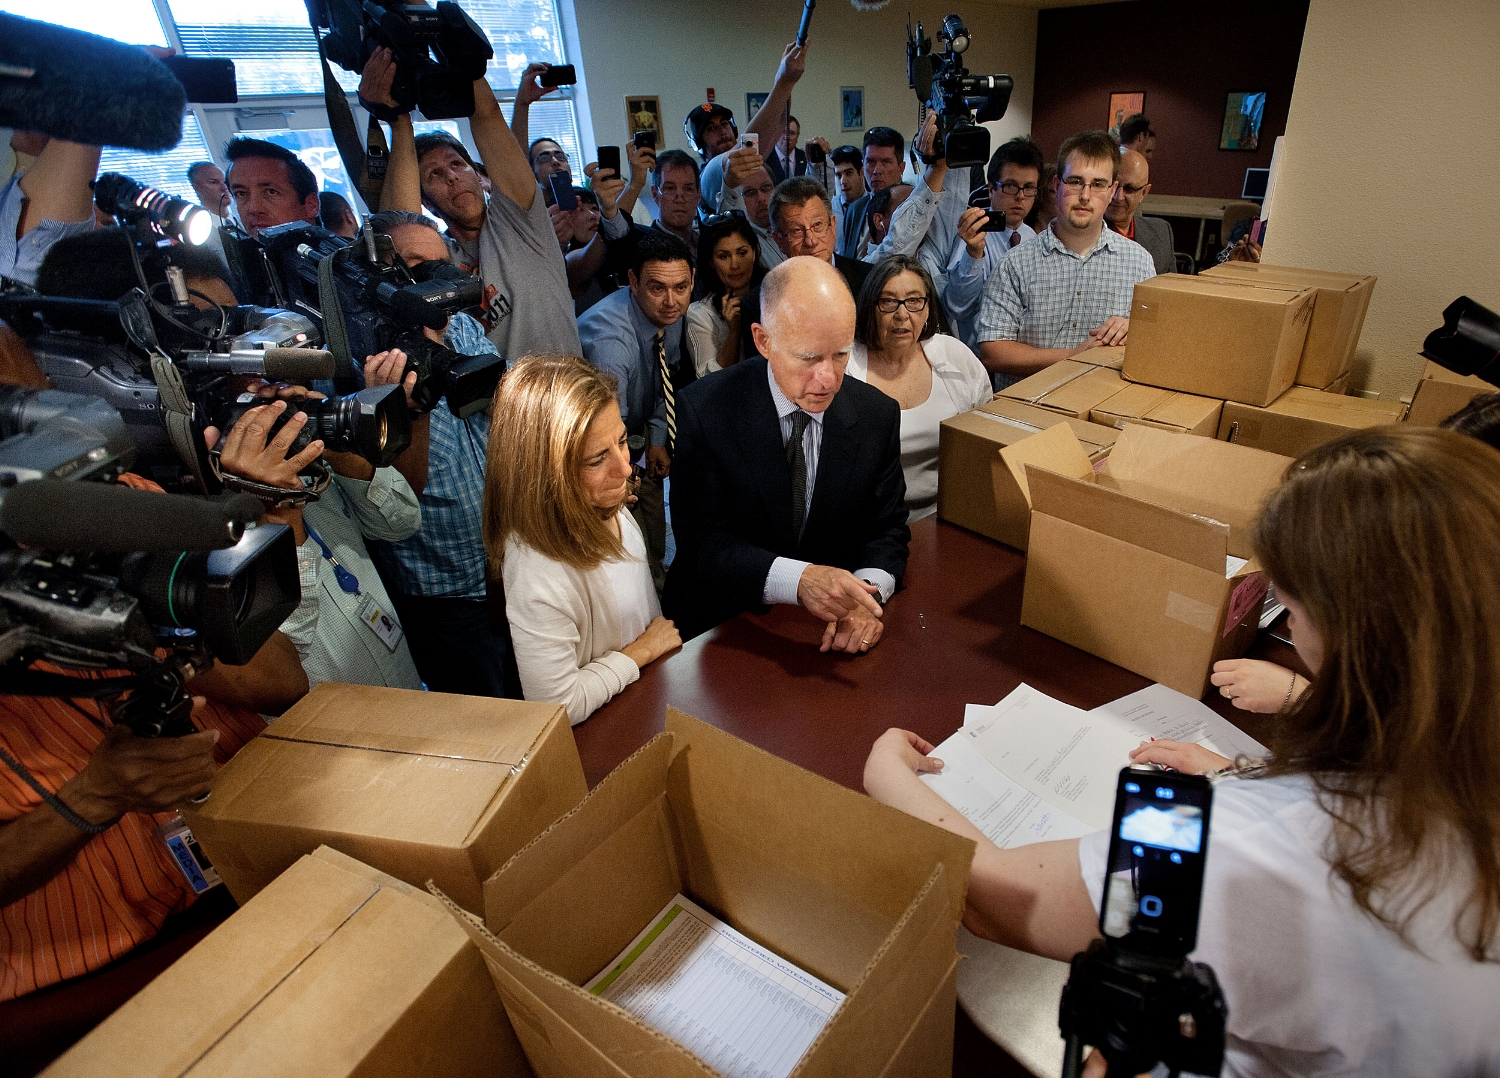  California Governor Jerry Brown delivers signatures for a tax measure to the county registrar's office in Sacramento on Thursday, May 10, 2012. HIs wife, First Lady Anne Gust Brown is with him on the left. 